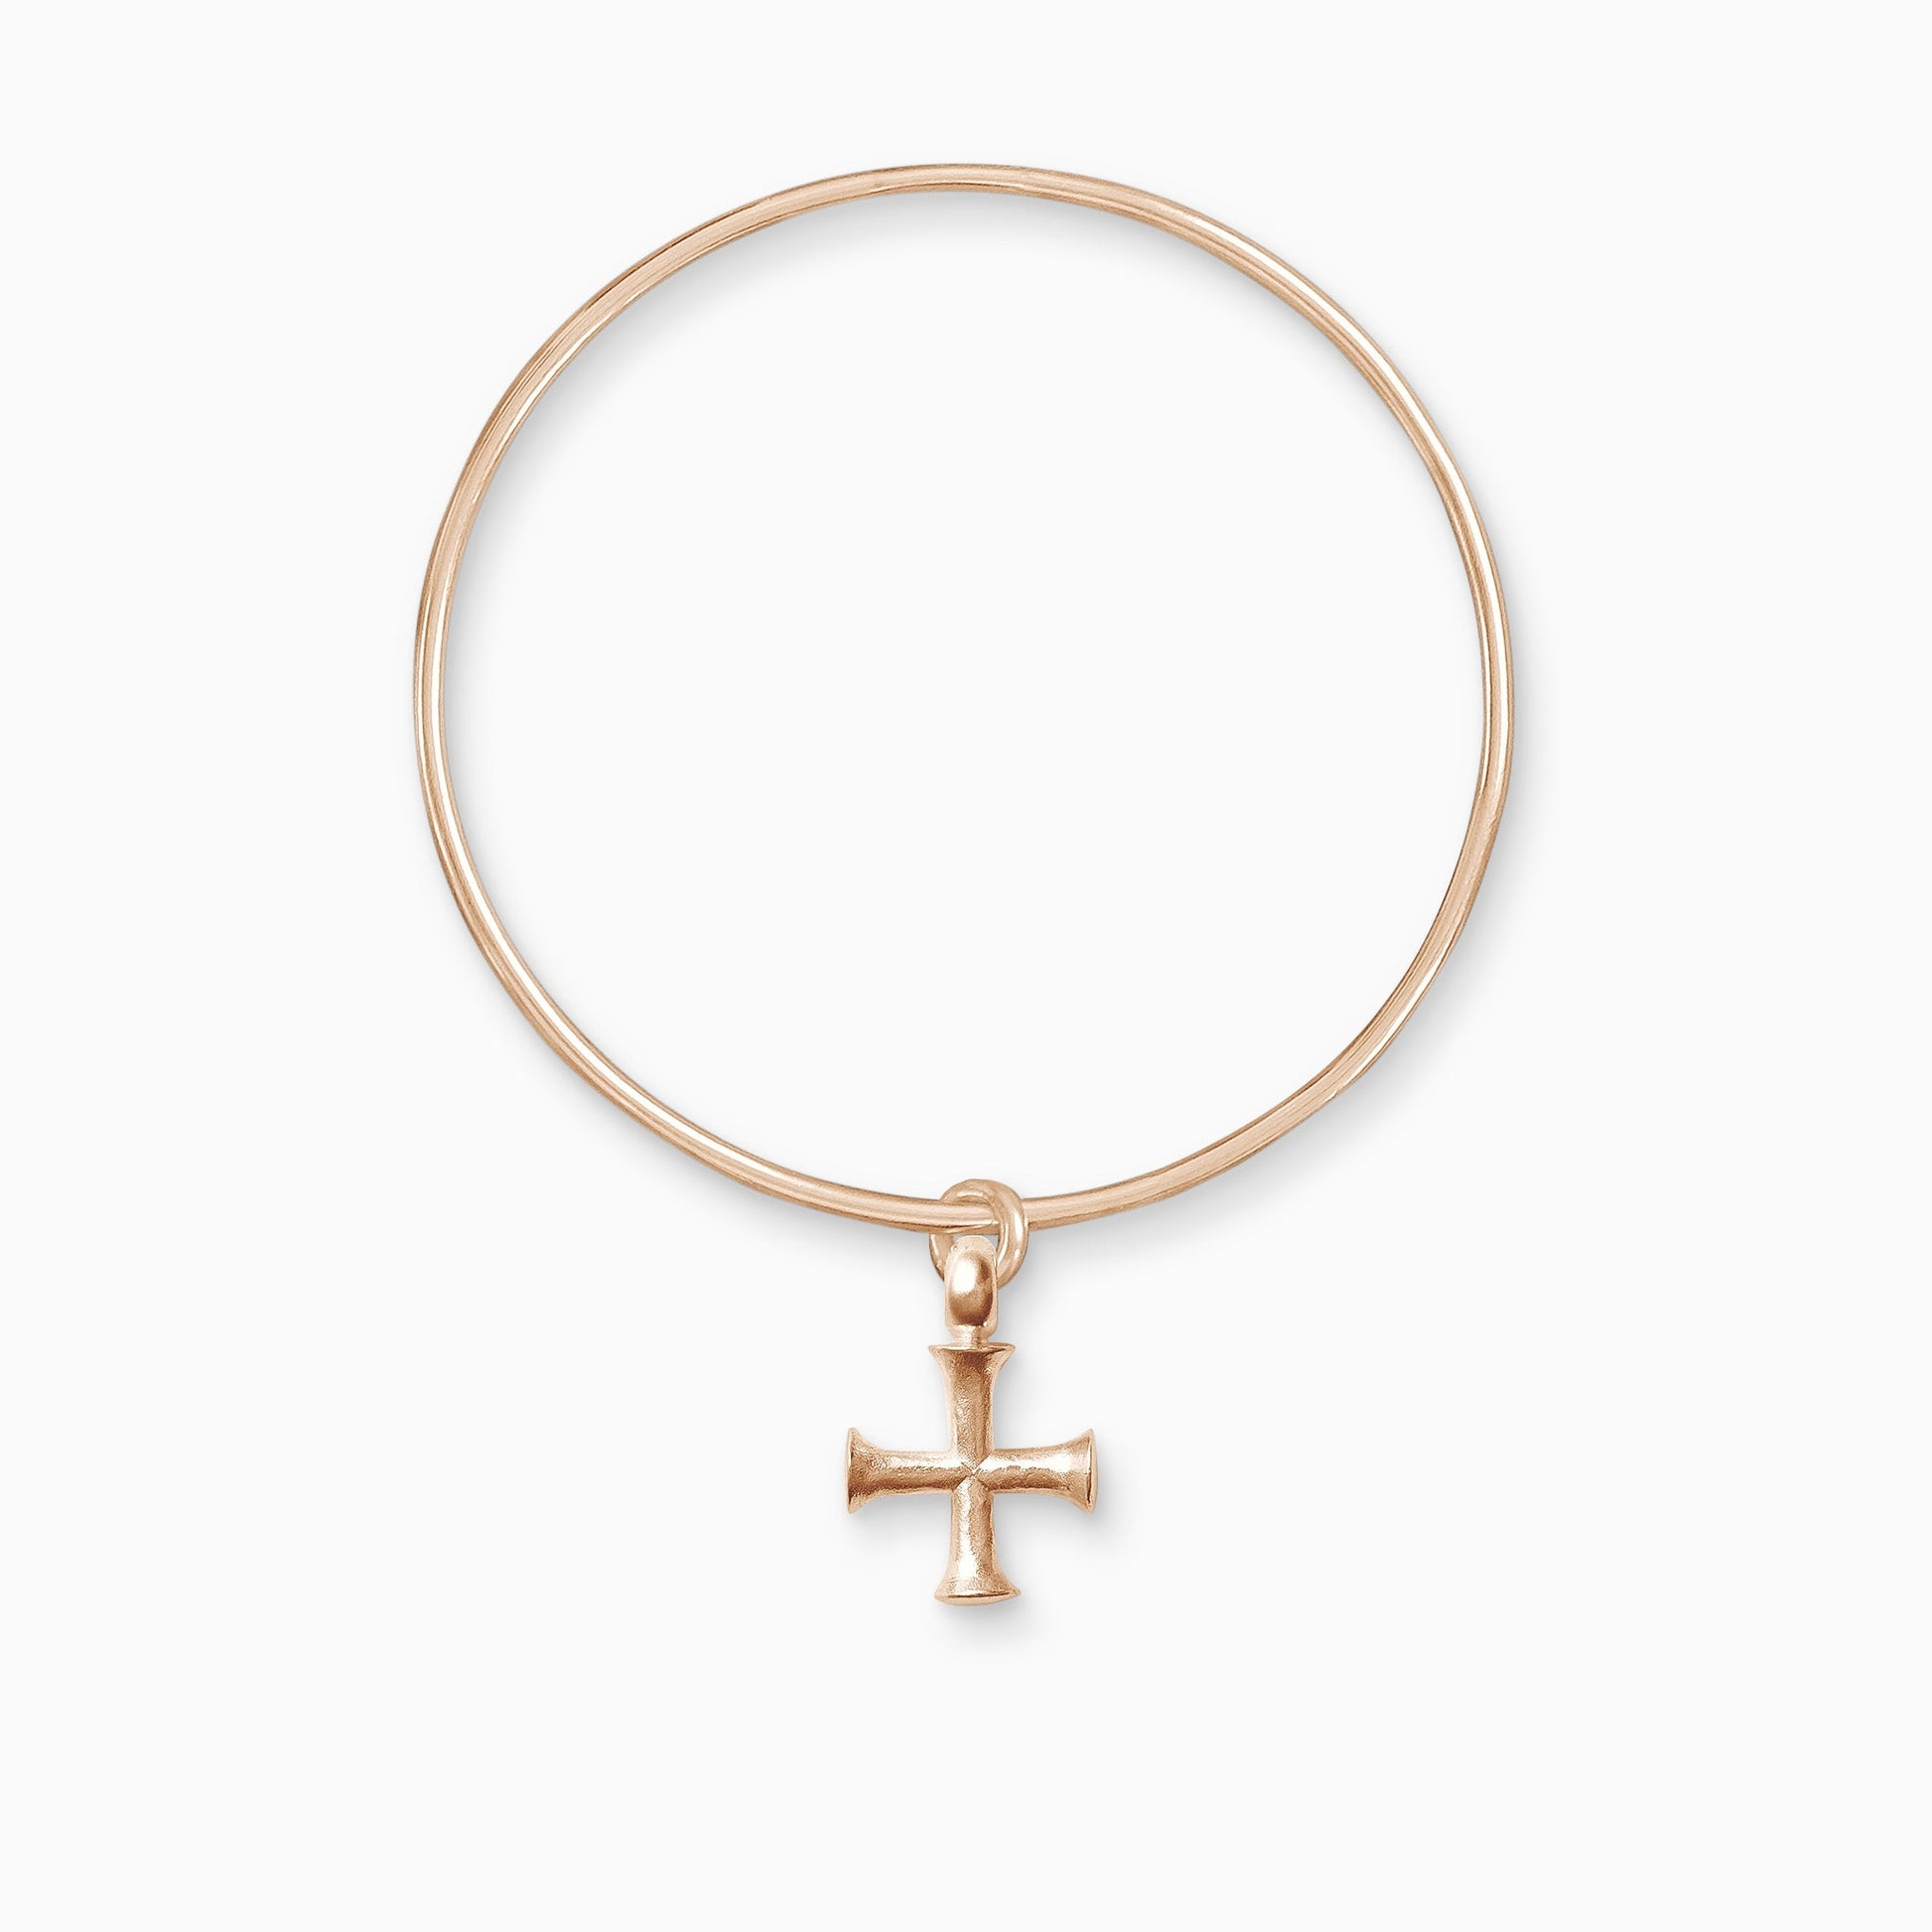 An 18ct Fairtrade rose gold geometric cross charm freely moving on a round wire bangle. The cross has equal length arms with outward spreading ends.  Charm 25mm. Bangle, 63mm inside diameter x 2mm round wire.